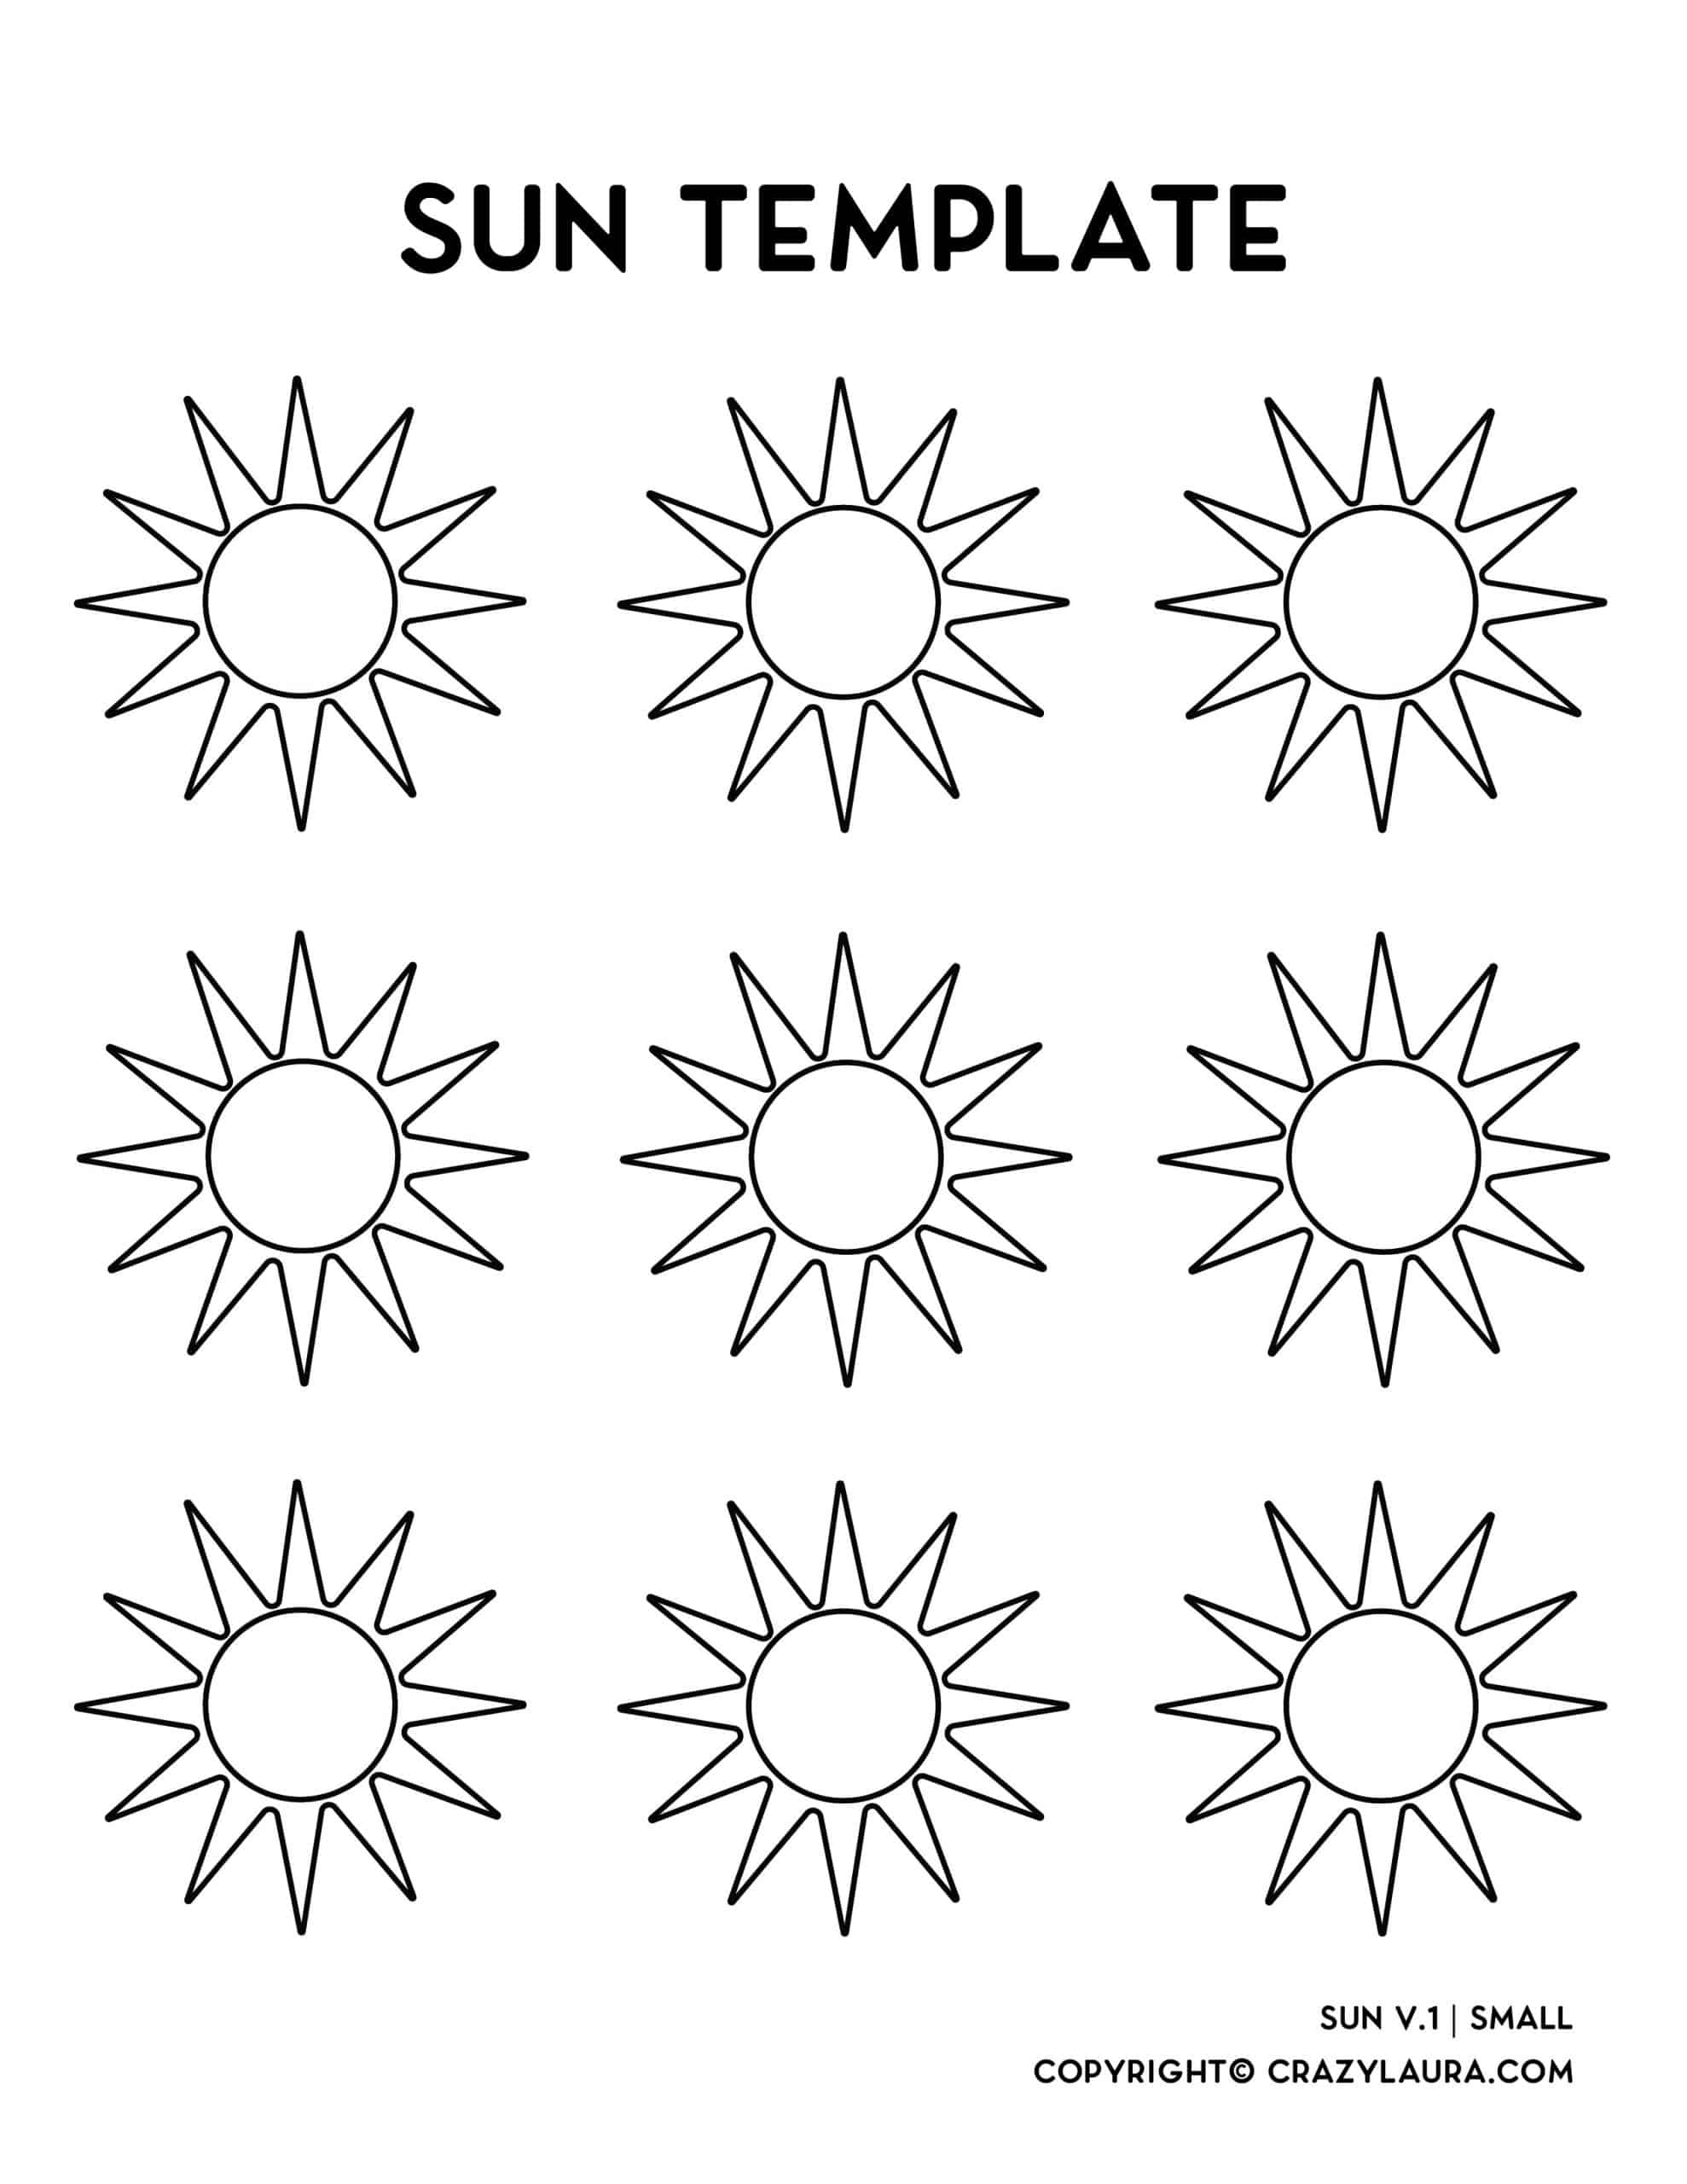 small sun template to print off